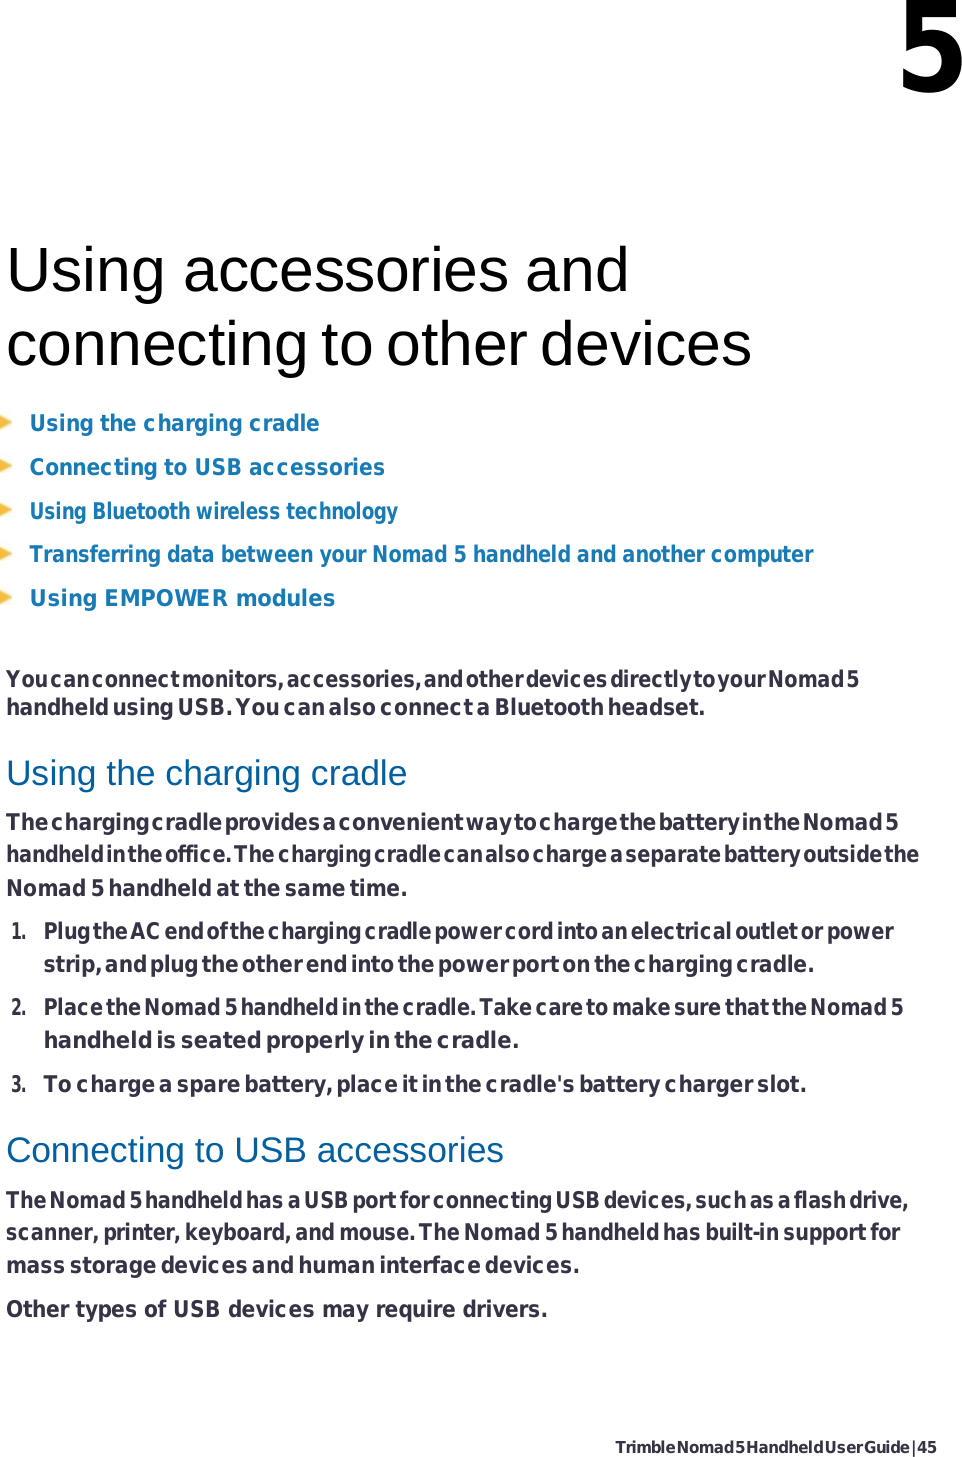 Trimble Nomad 5 Handheld User Guide | 45   5    Using accessories and connecting to other devices Using the charging cradle Connecting to USB accessories Using Bluetooth wireless technology Transferring data between your Nomad 5 handheld and another computer Using EMPOWER modules  You can connect monitors, accessories, and other devices directly to your Nomad 5 handheld using USB. You can also connect a Bluetooth headset.  Using the charging cradle The charging cradle provides a convenient way to charge the battery in the Nomad 5 handheld in the office. The charging cradle can also charge a separate battery outside the Nomad 5 handheld at the same time. 1. Plug the AC end of the charging cradle power cord into an electrical outlet or power strip, and plug the other end into the power port on the charging cradle. 2. Place the Nomad 5 handheld in the cradle. Take care to make sure that the Nomad 5 handheld is seated properly in the cradle. 3. To charge a spare battery, place it in the cradle&apos;s battery charger slot.  Connecting to USB accessories The Nomad 5 handheld has a USB port for connecting USB devices, such as a flash drive, scanner, printer, keyboard, and mouse. The Nomad 5 handheld has built-in support for mass storage devices and human interface devices. Other types of USB devices may require drivers. 